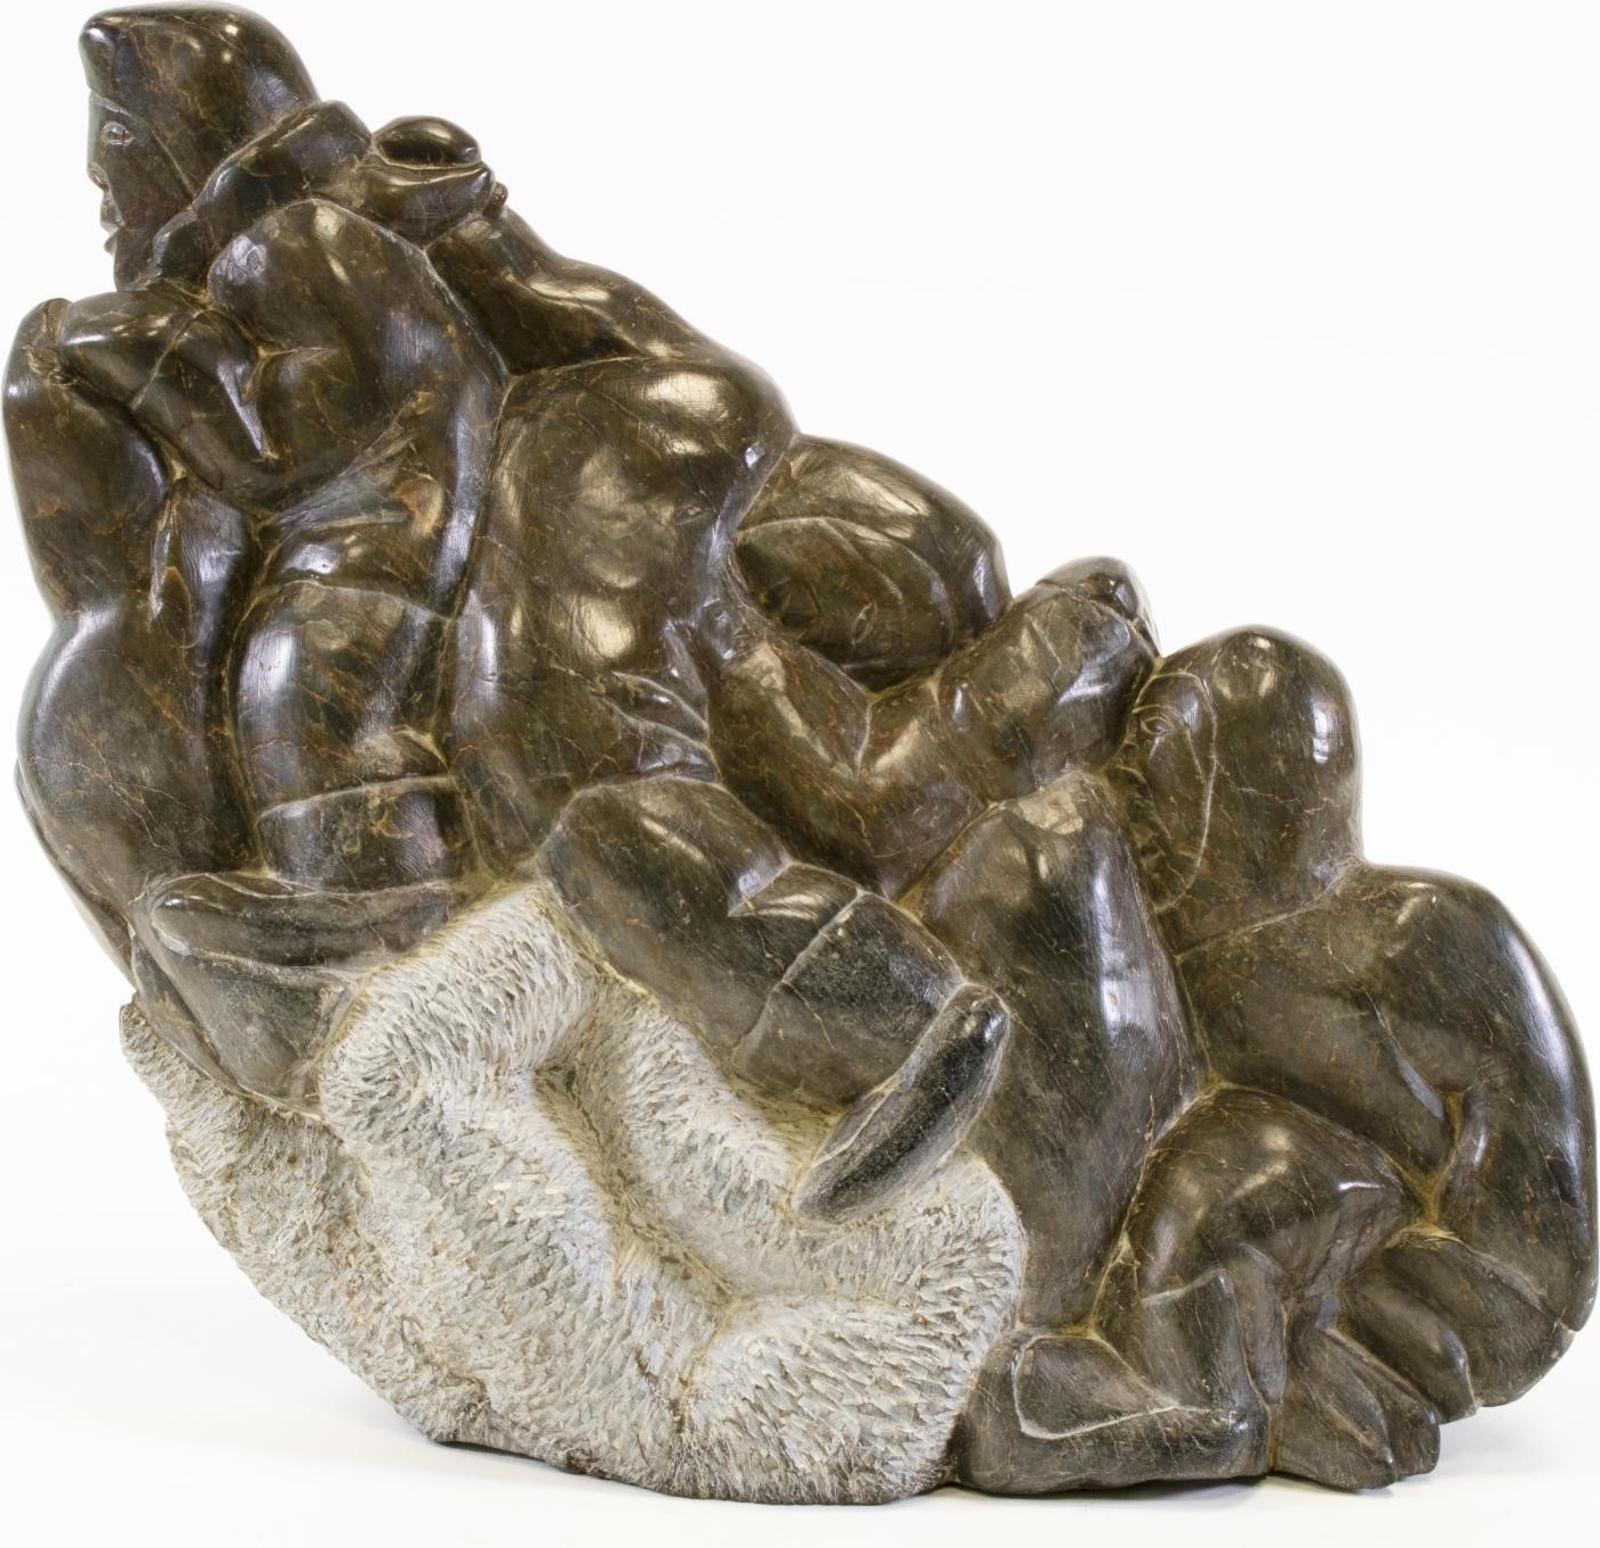 Adamie Ningeok (1948) - Lets All Pull Together (A Tangle Of Figures, Human, Seal, Bear); 1980